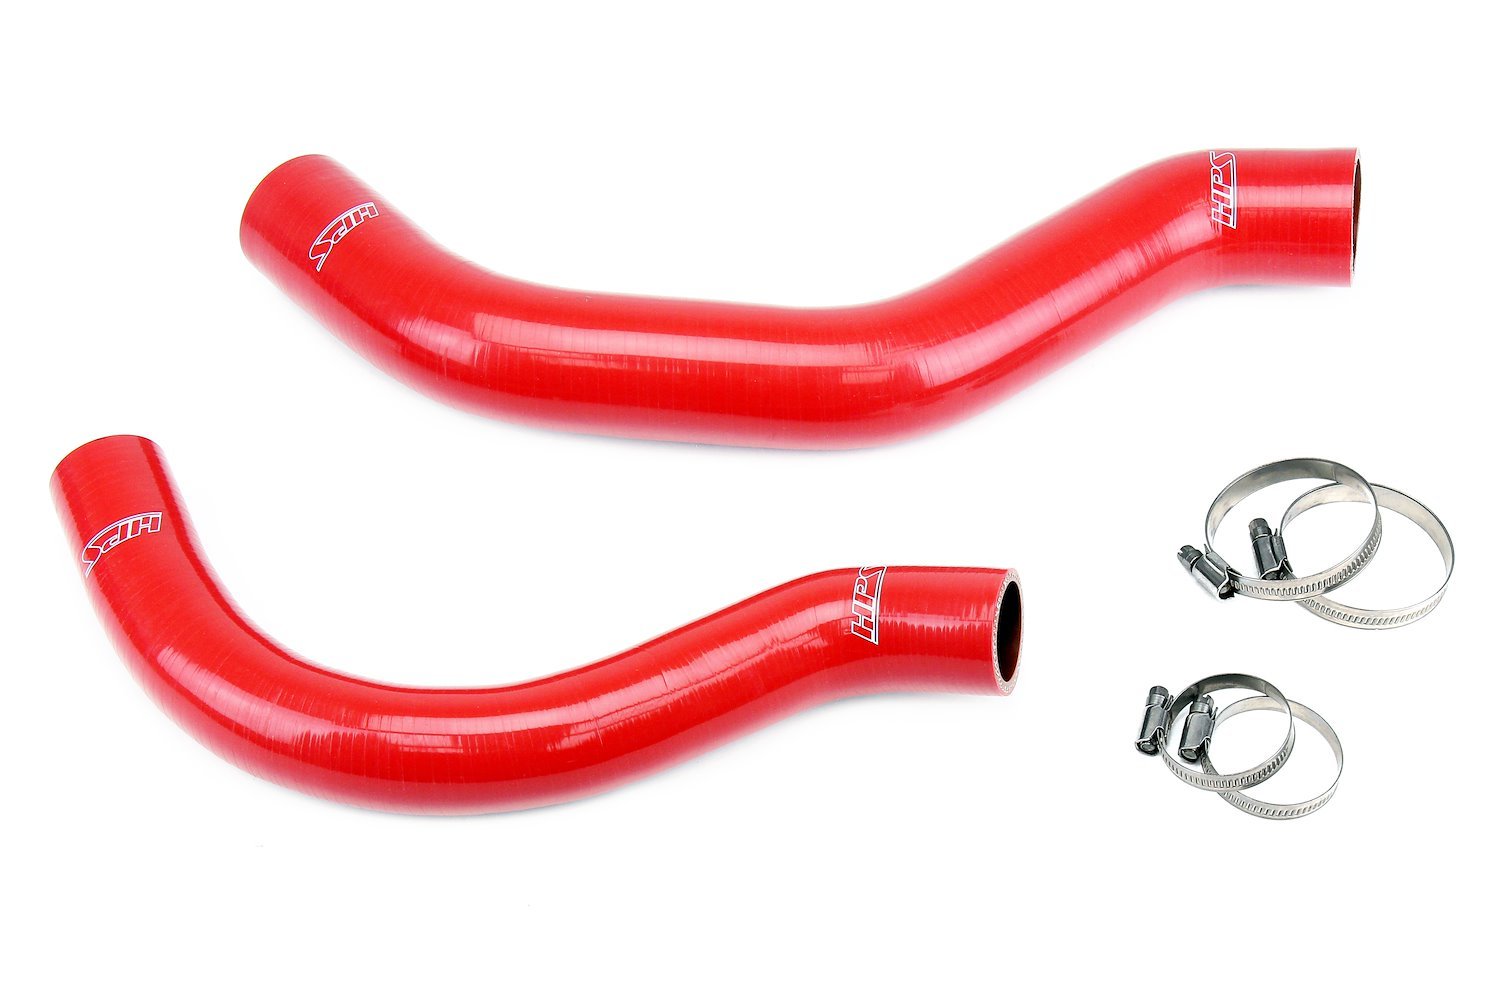 57-2001-RED Radiator Hose Kit, 3-Ply Reinforced Silicone, Replaces Rubber Radiator Coolant Hoses